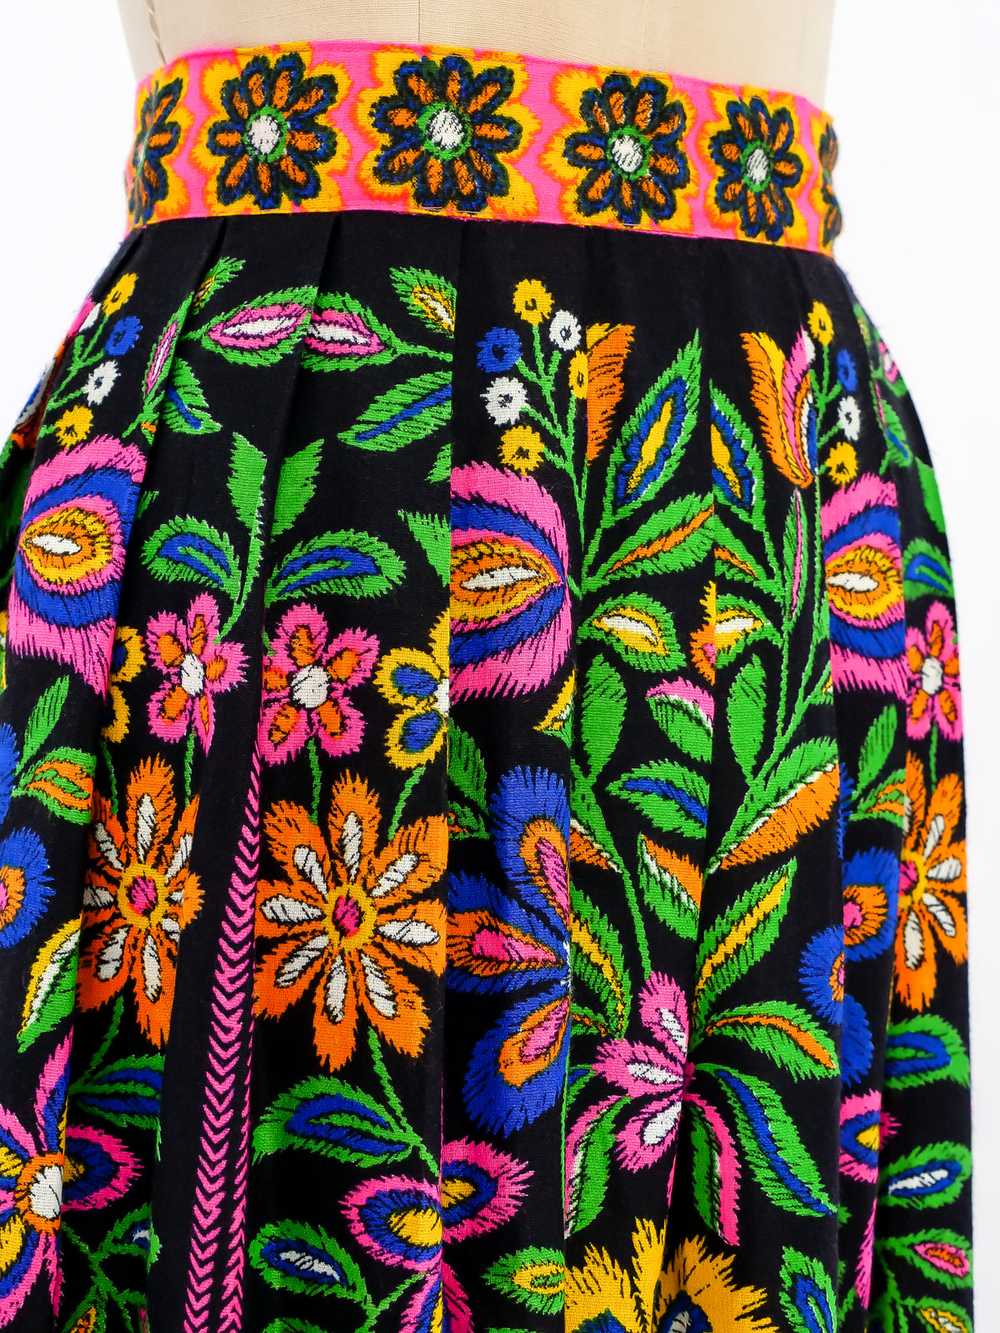 Psychedelic Floral Printed Skirt - image 2